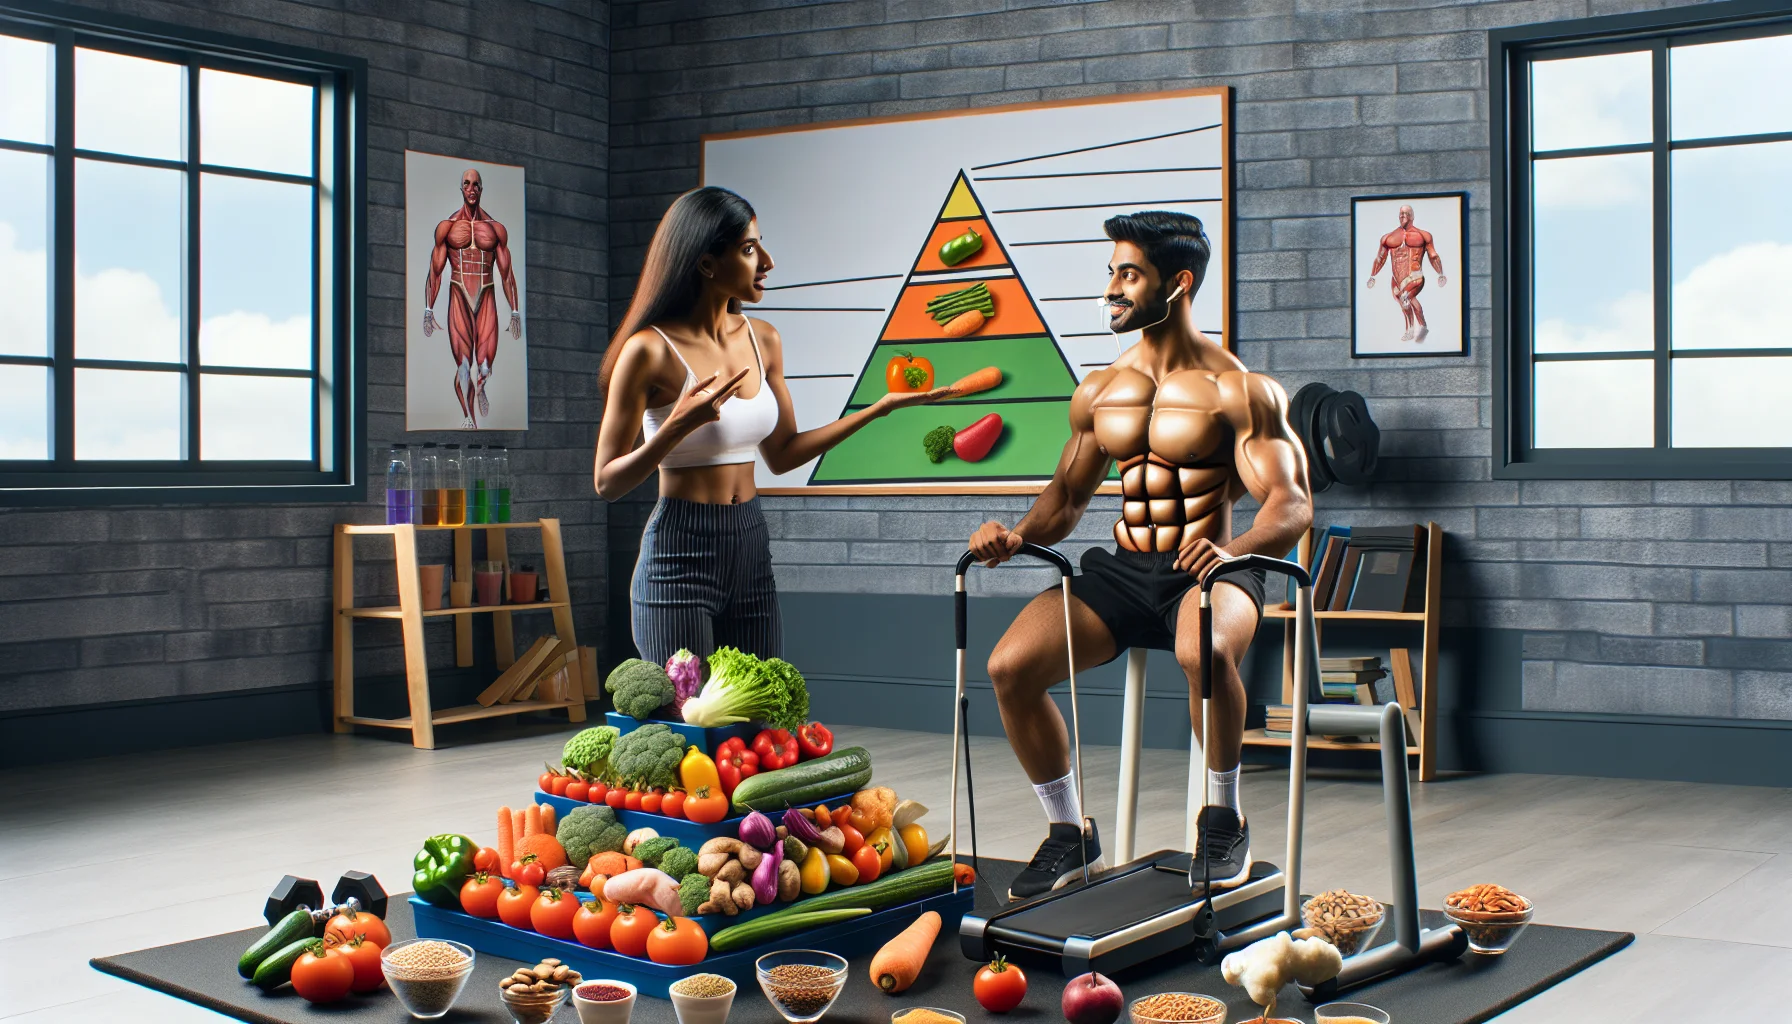 Create a humorous, realistic image that portrays meal planning for weight loss, specifically designed for fitness enthusiasts. Visualize a scene where various healthy foods like vegetables, lean proteins, and whole grains are having a 'gym session', lifting miniature weights or using micro treadmills, portraying the foods as if they are working out. Place a food pyramid in the backdrop acting as a motivational poster on the wall. Include a male South Asian personal trainer and a female Black nutritionist in an engaging conversation about the benefits of regular exercise and healthy eating.